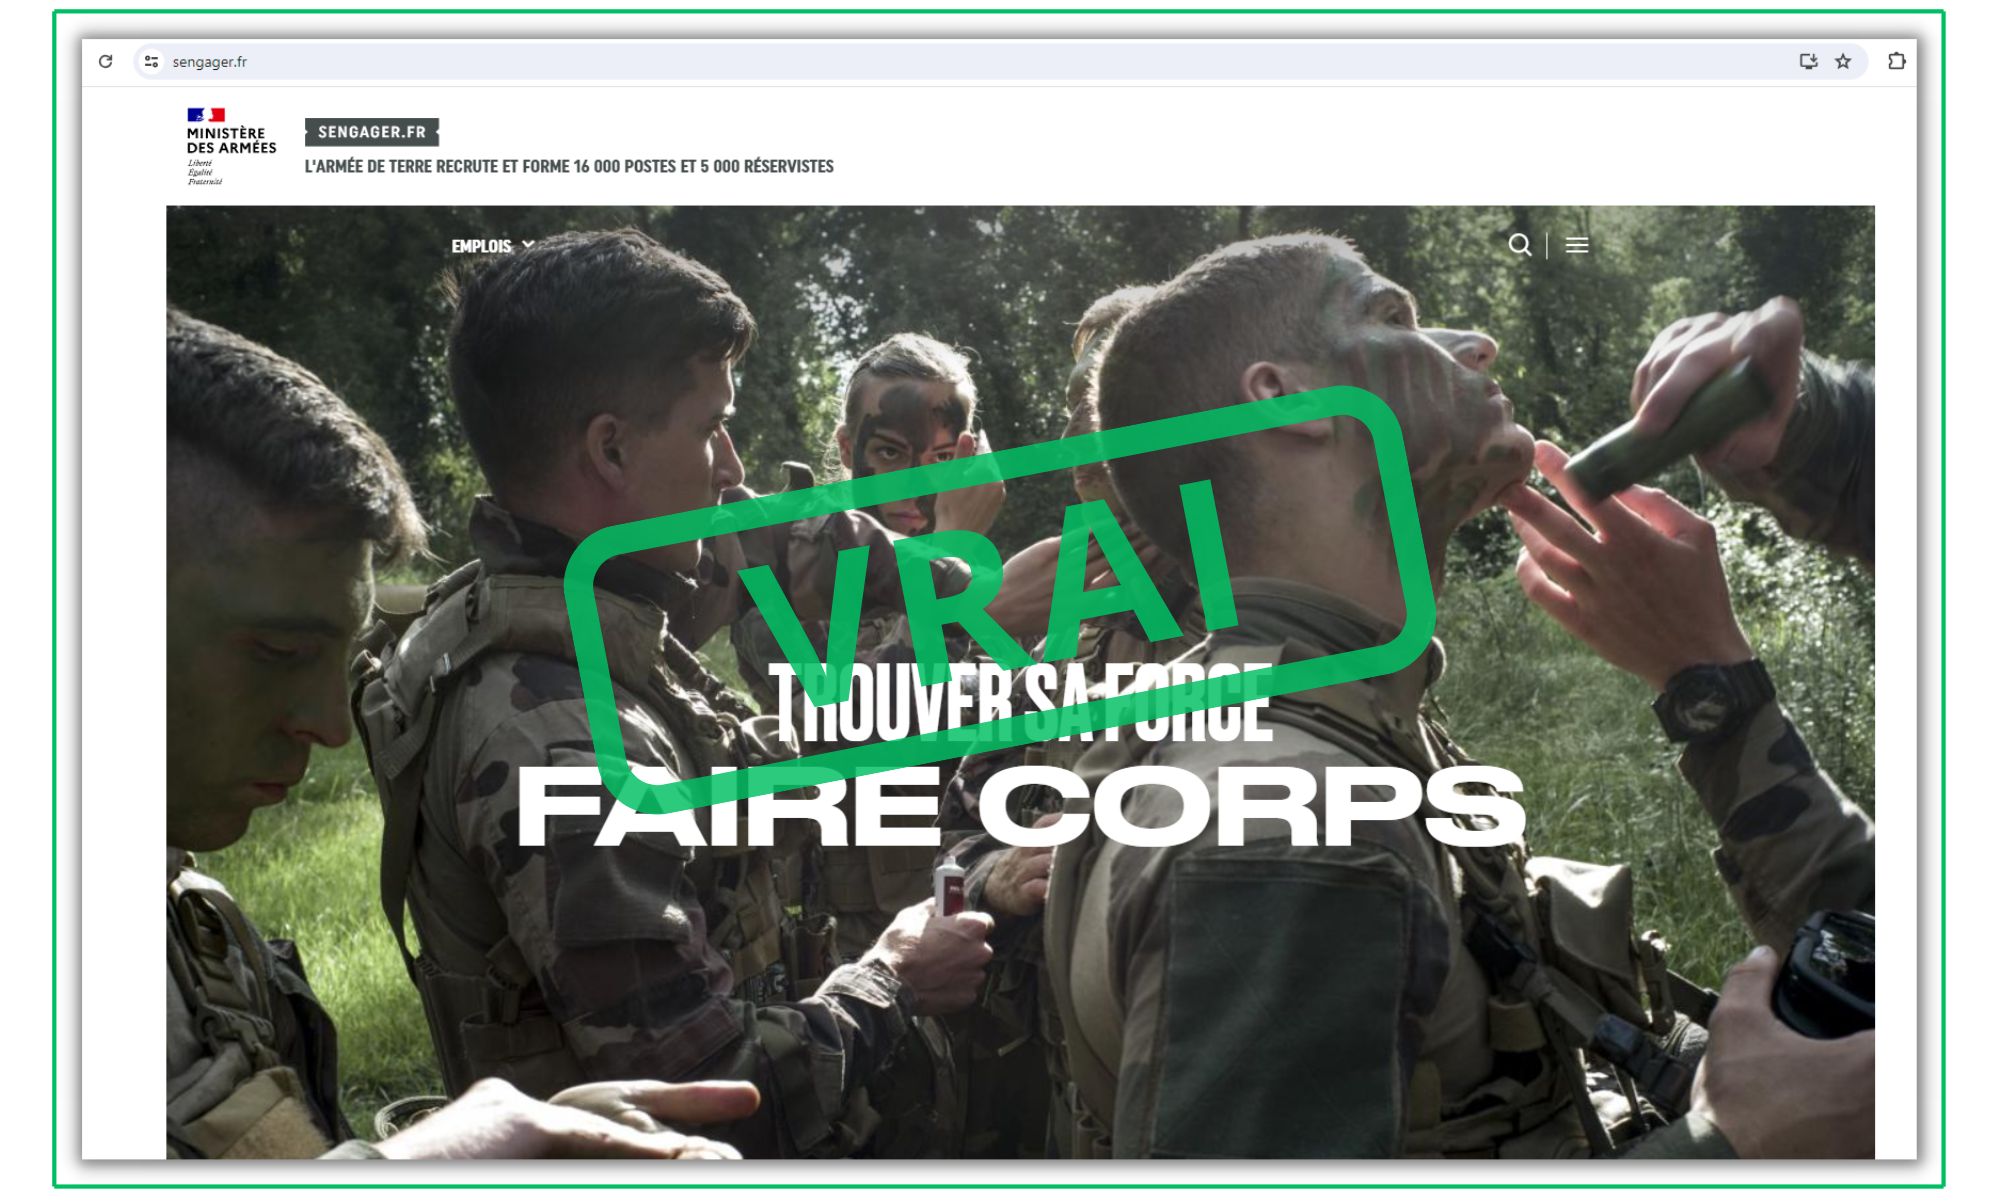 The real French army website dedicated to recruitment does not refer to Ukraine.